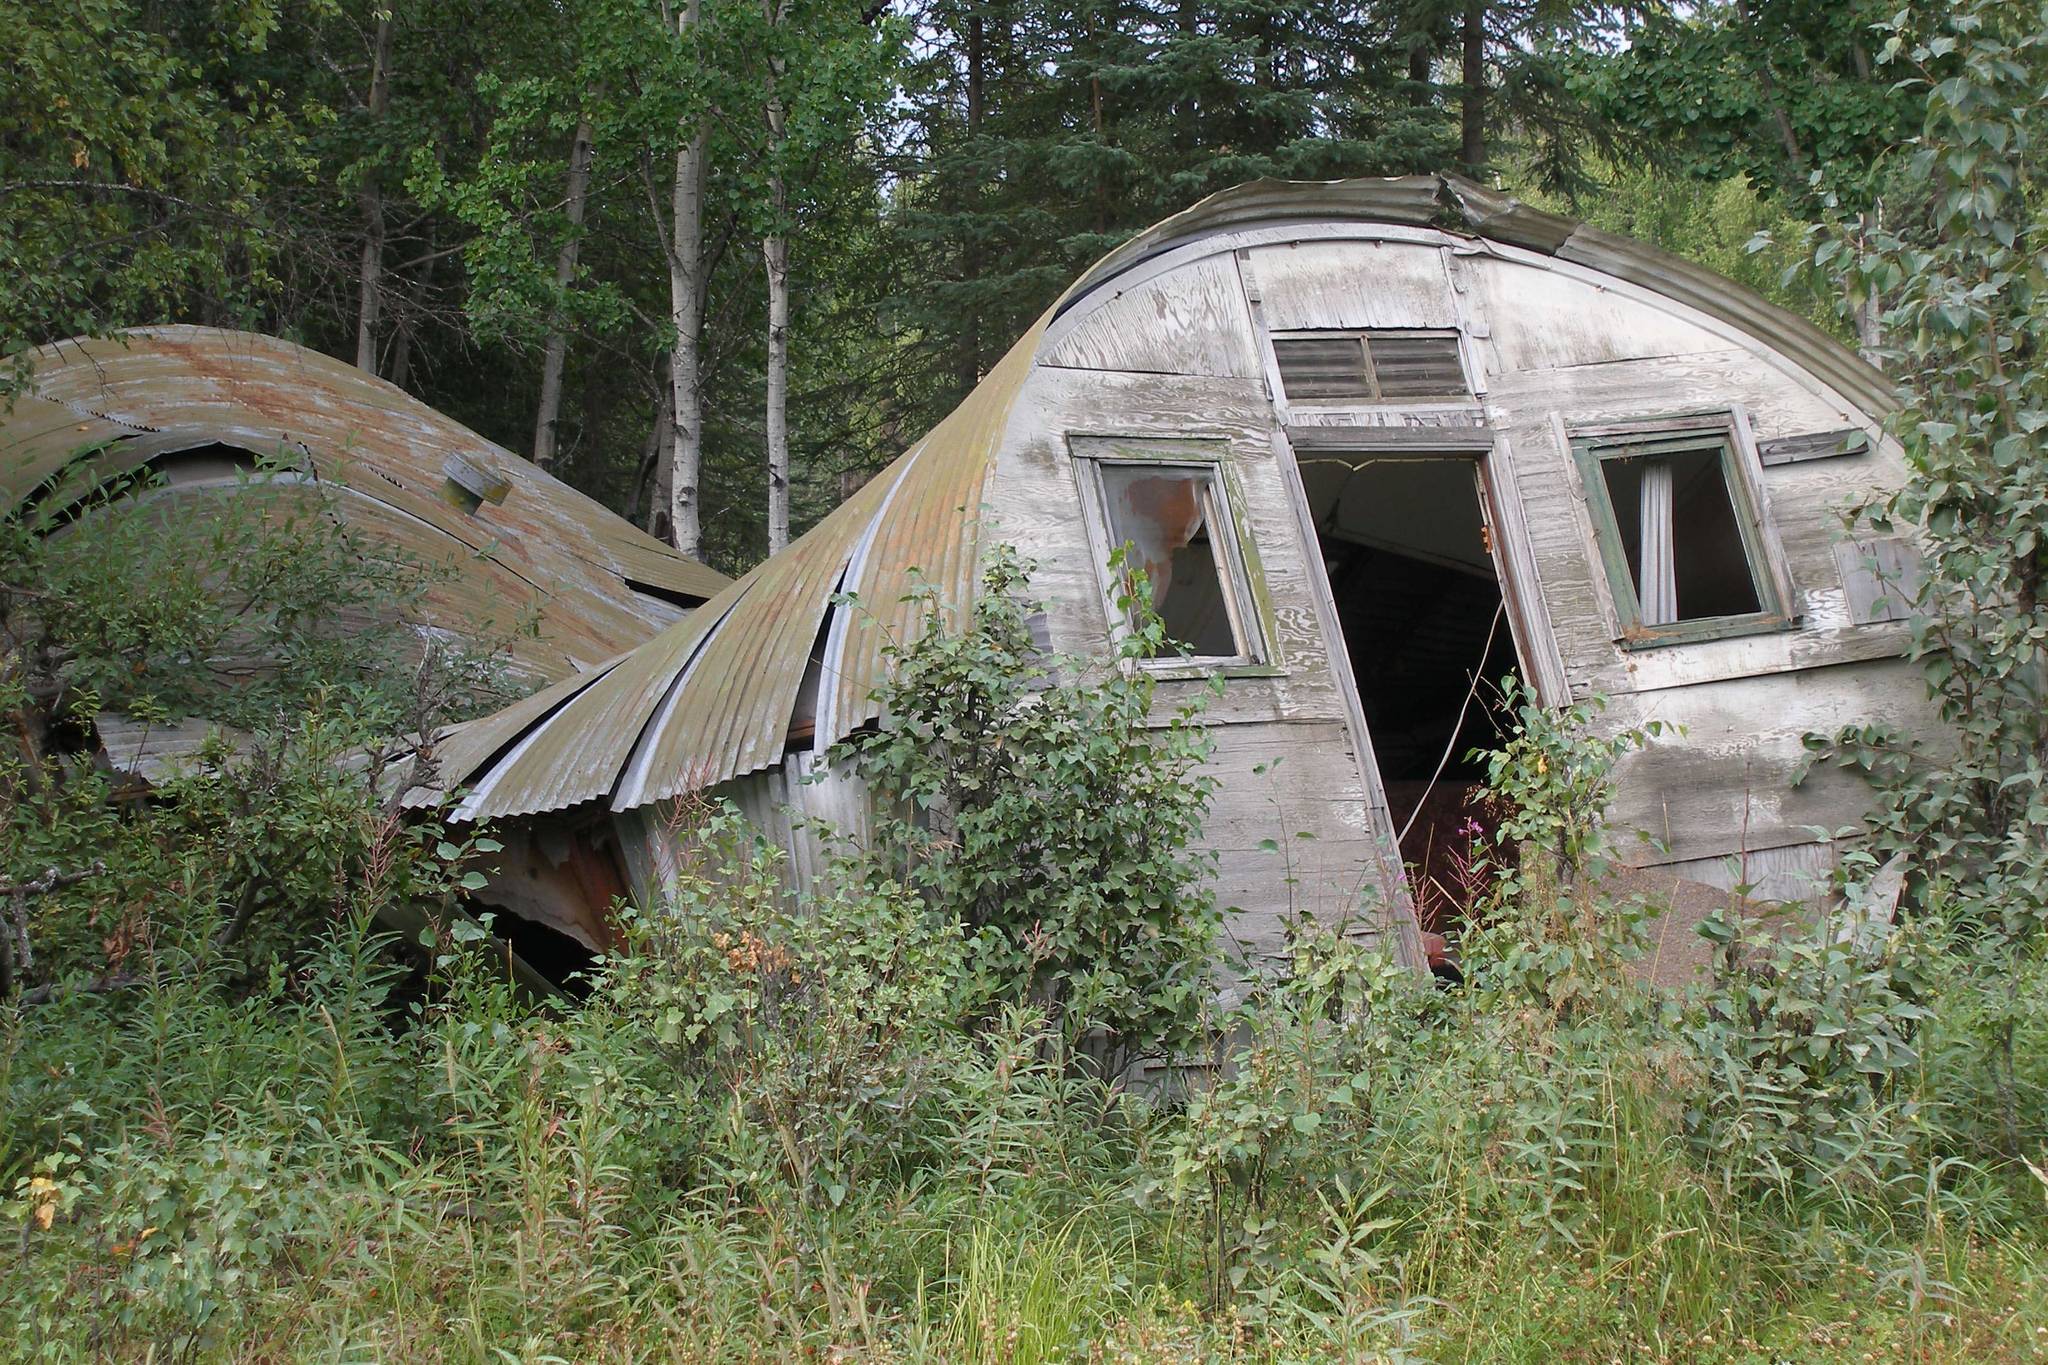 2007 photo by Clark Fair 
Sometimes called “Murder House” in the years after the killing, this dilapidated Quonset hut was the scene of the crime.